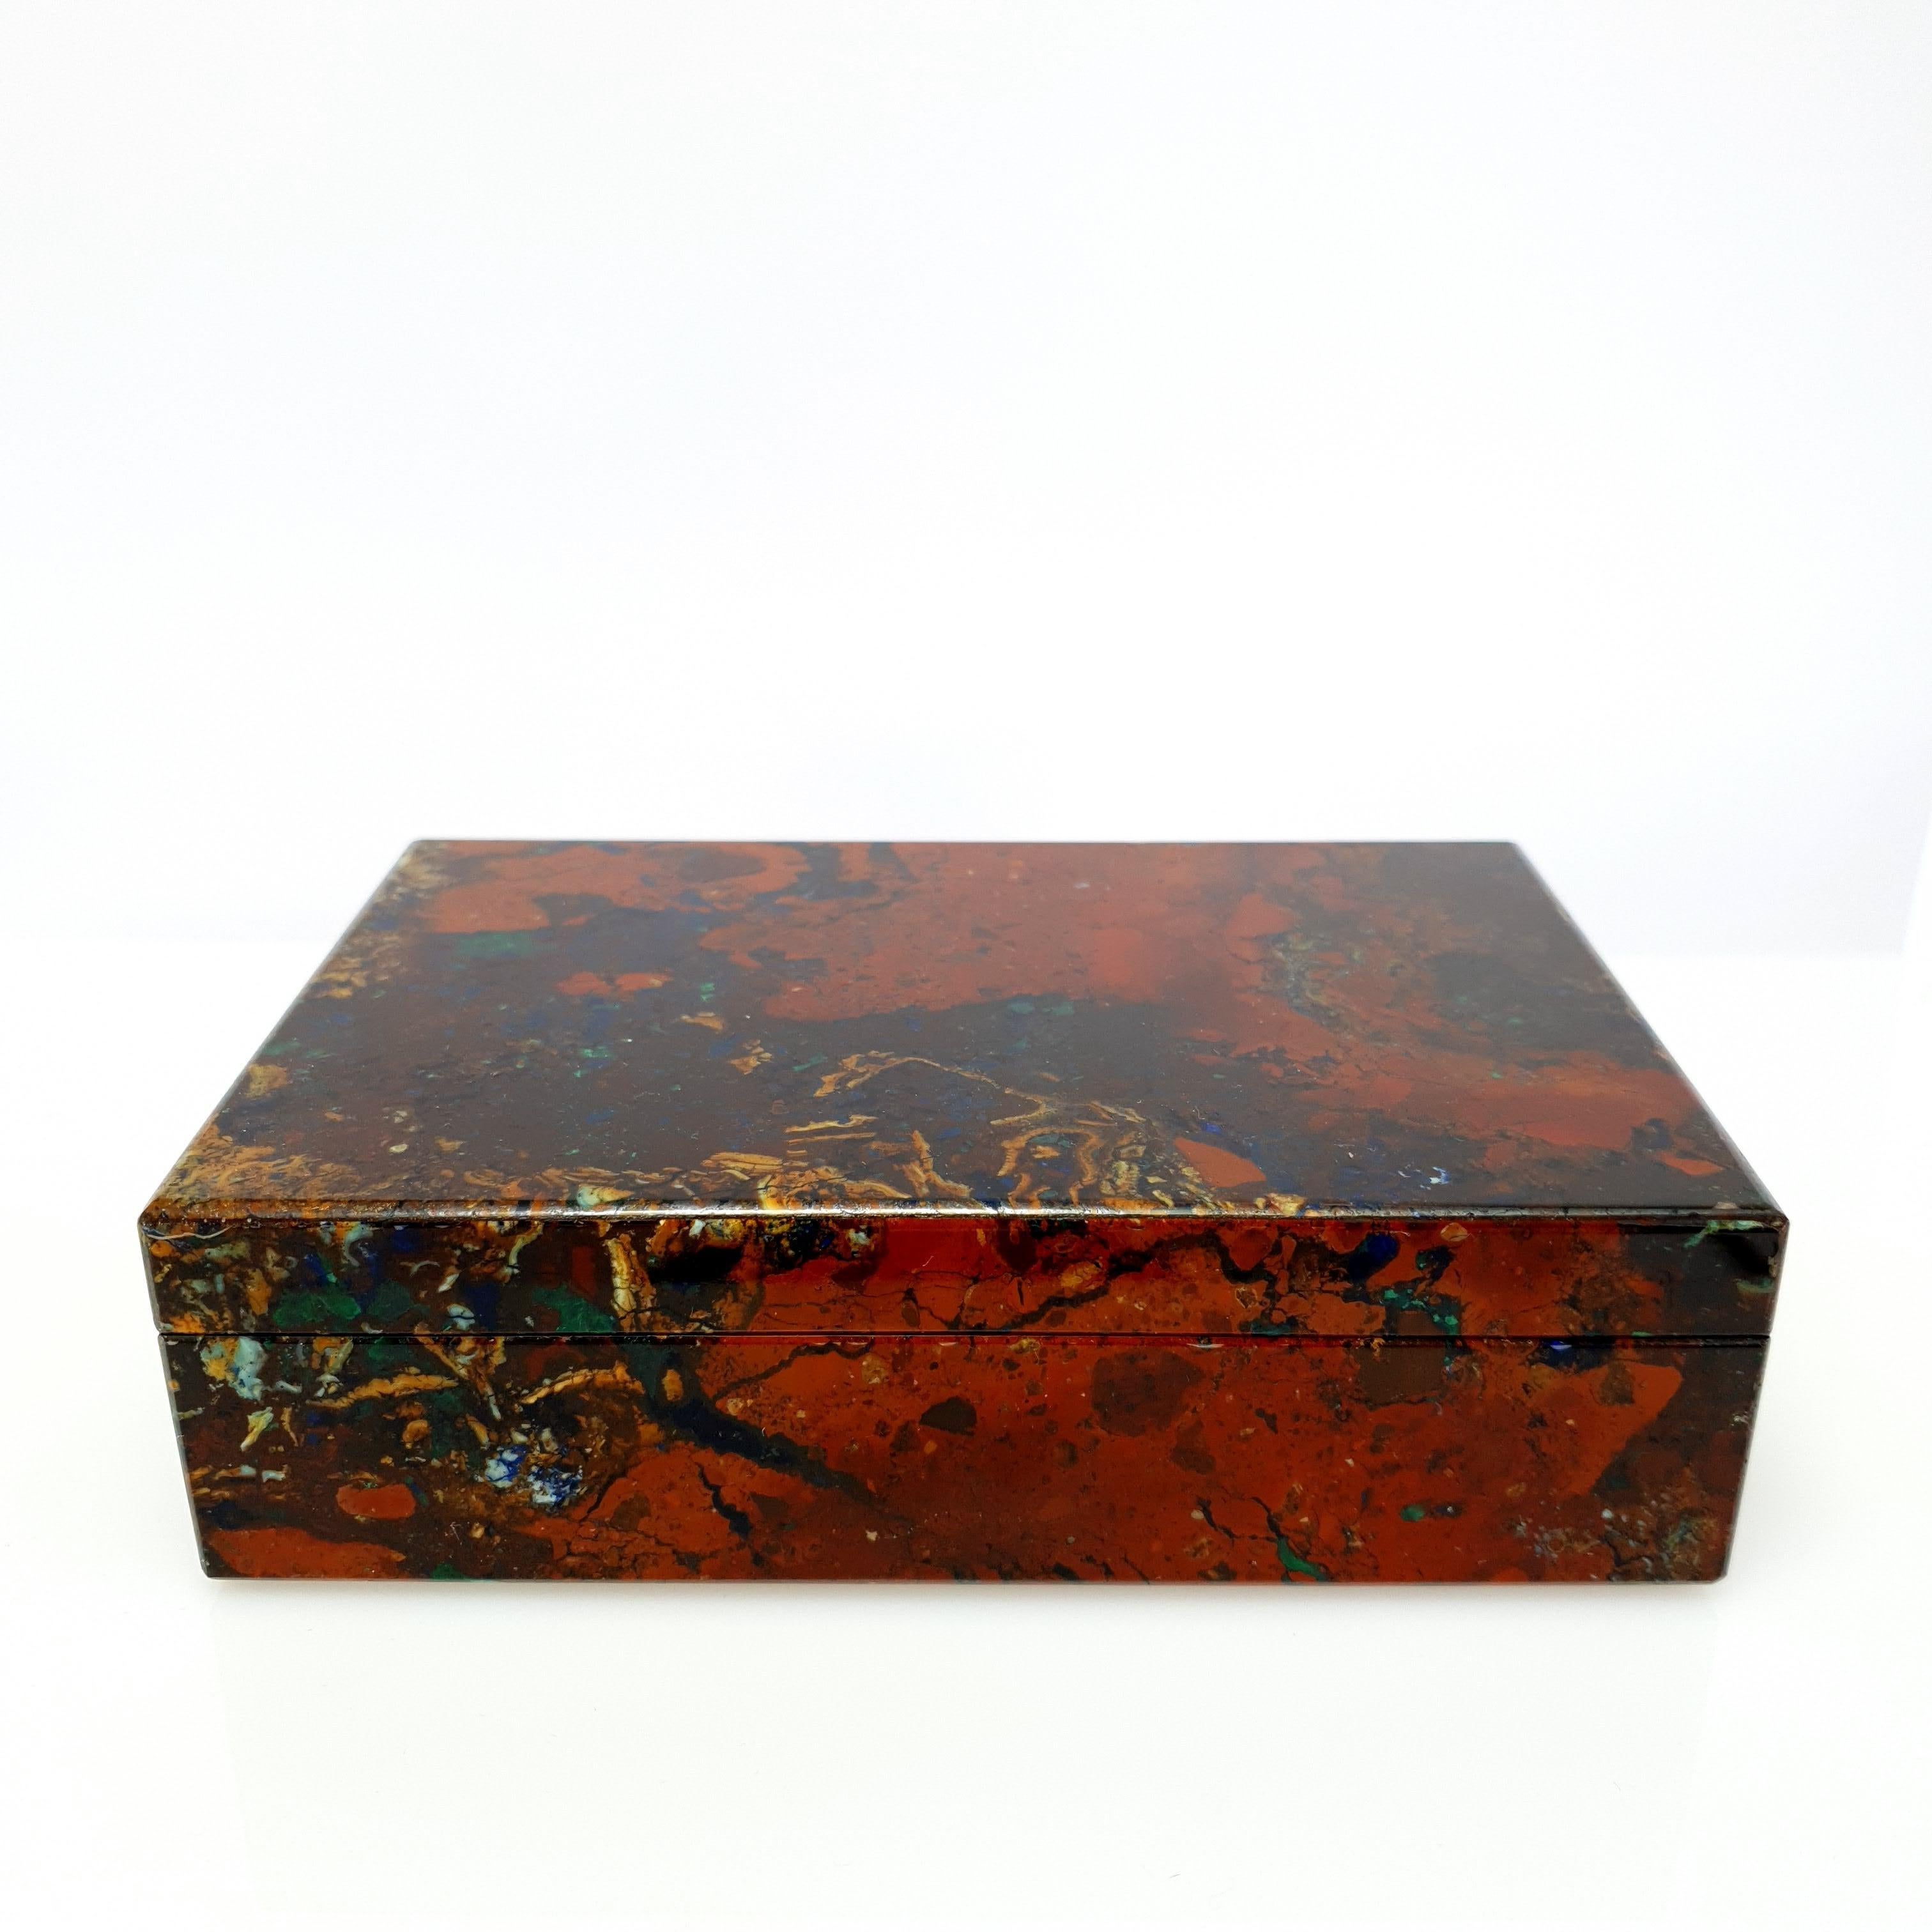 A Natural Handmade Red Brown Zarinite  and Black Marble Decorative Jewelry Box.
The colourful combination of blue Azurite, green Malachite and the red brown pattern looks like an artful painting of nature.
It should be emphasized that the top plate